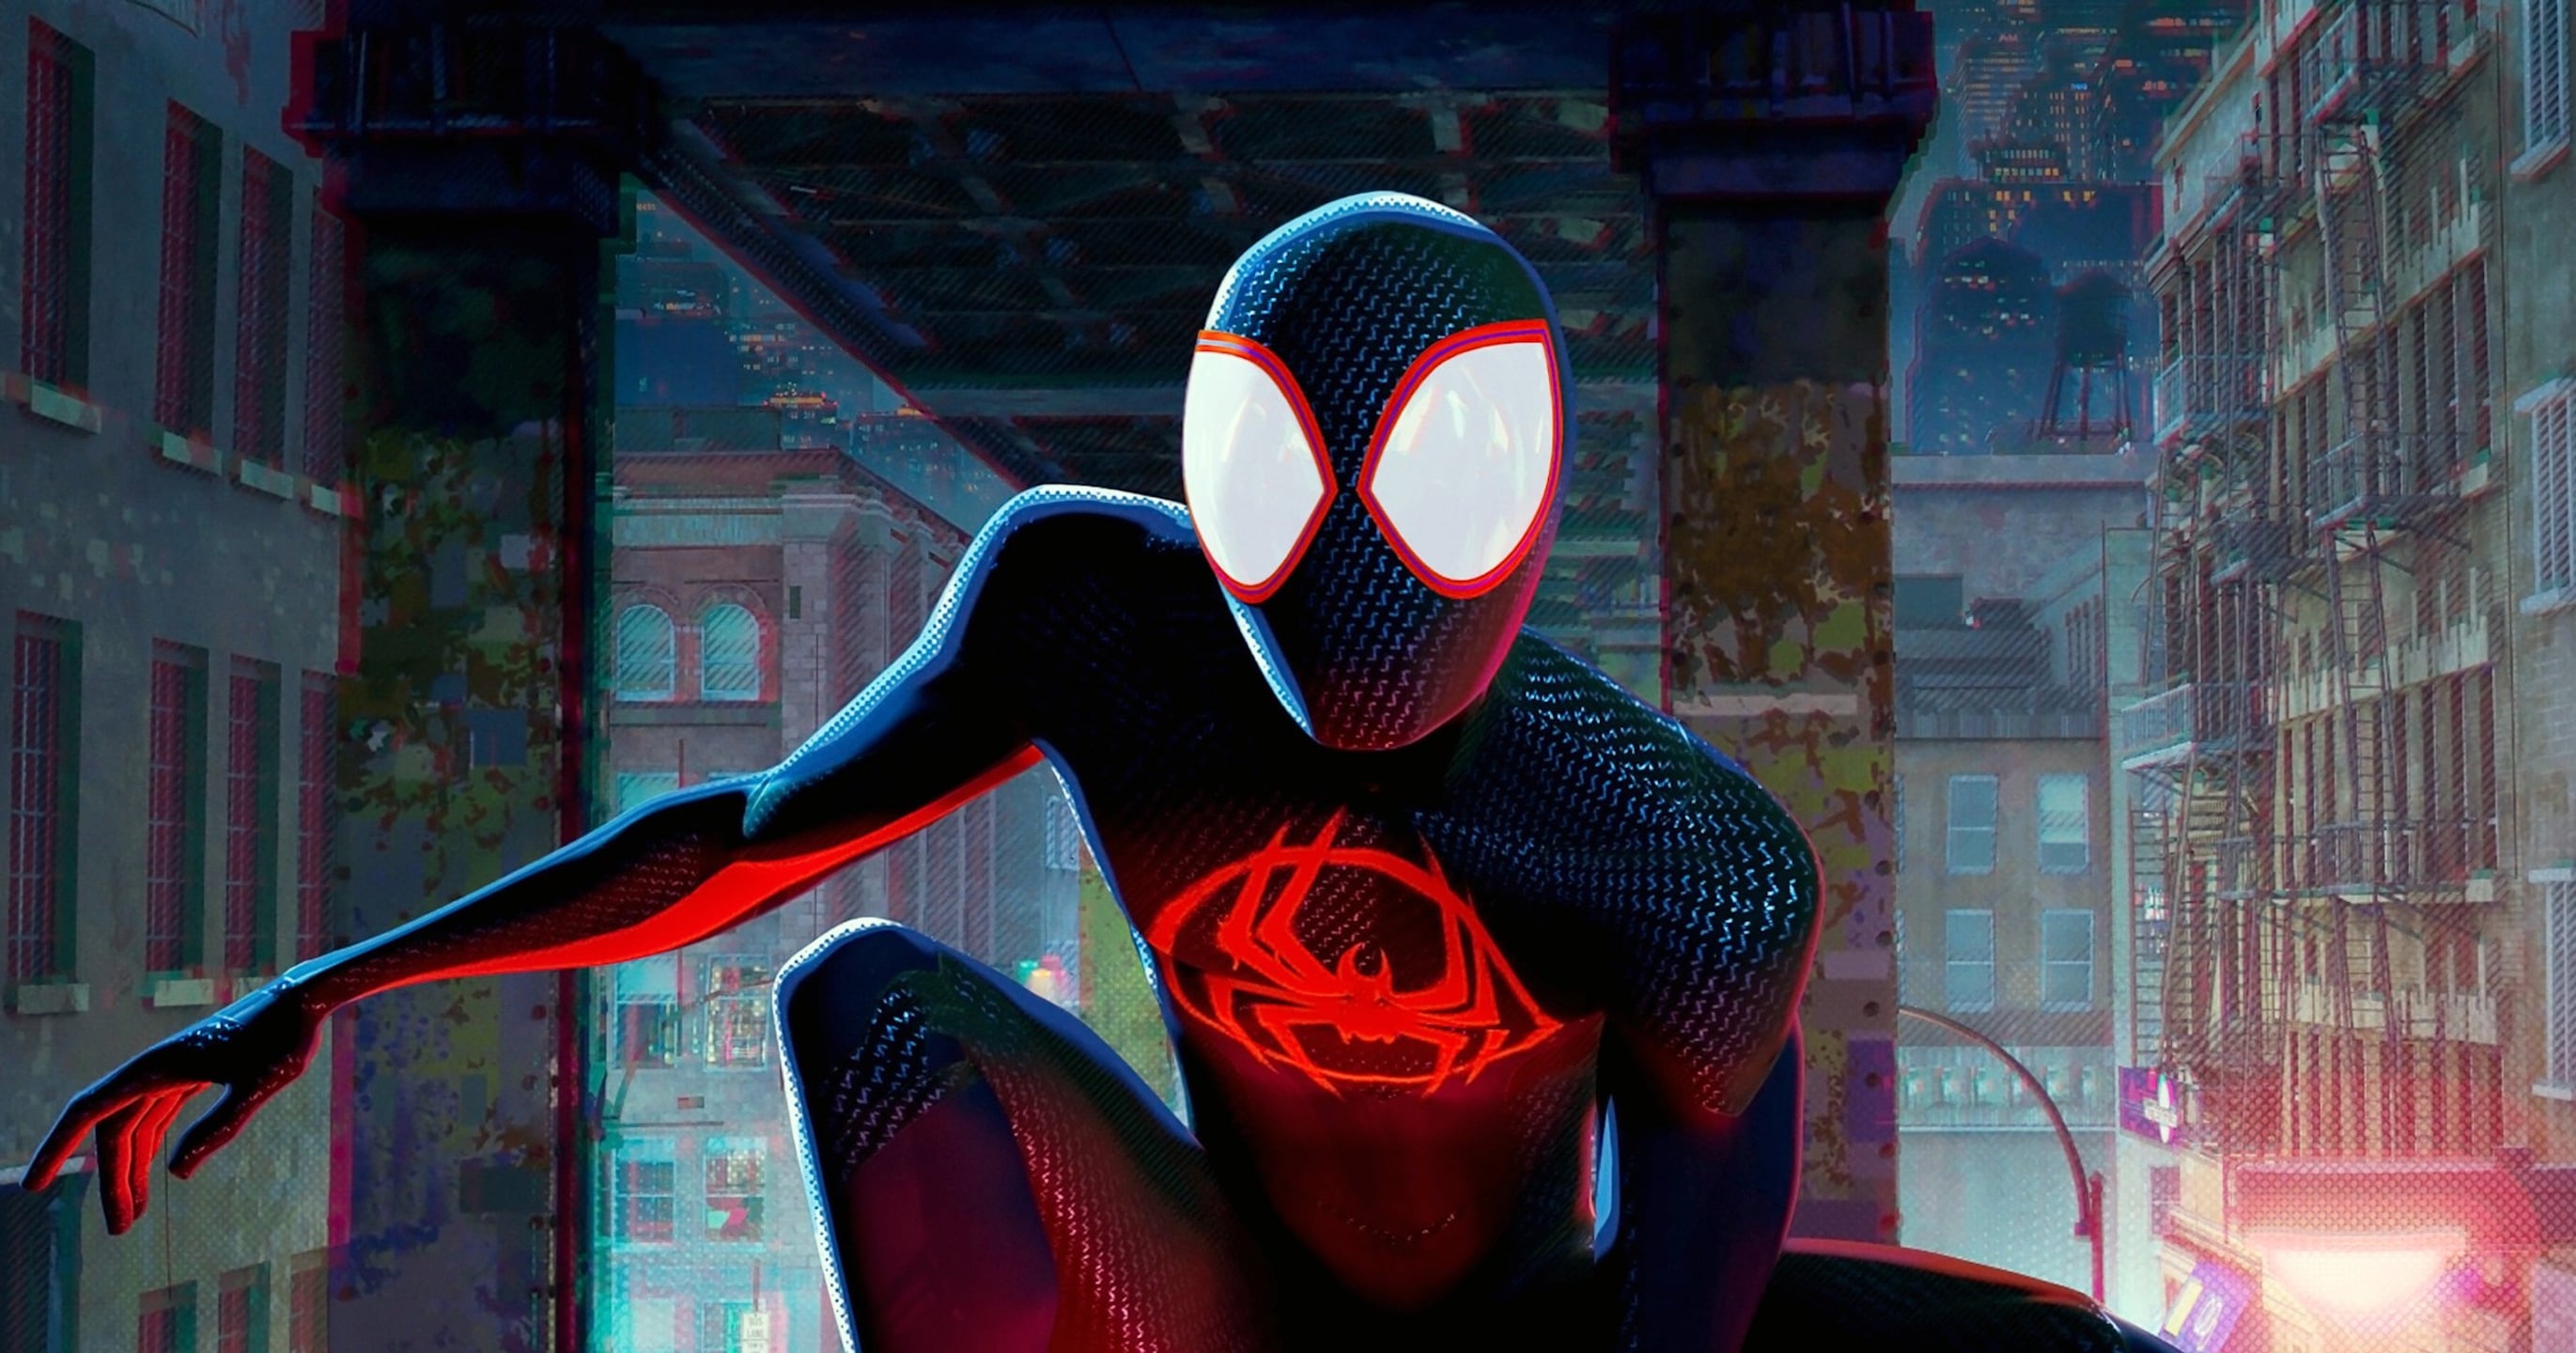 Spider-Man: Into the Spider-Verse Explores the Meaning Behind the